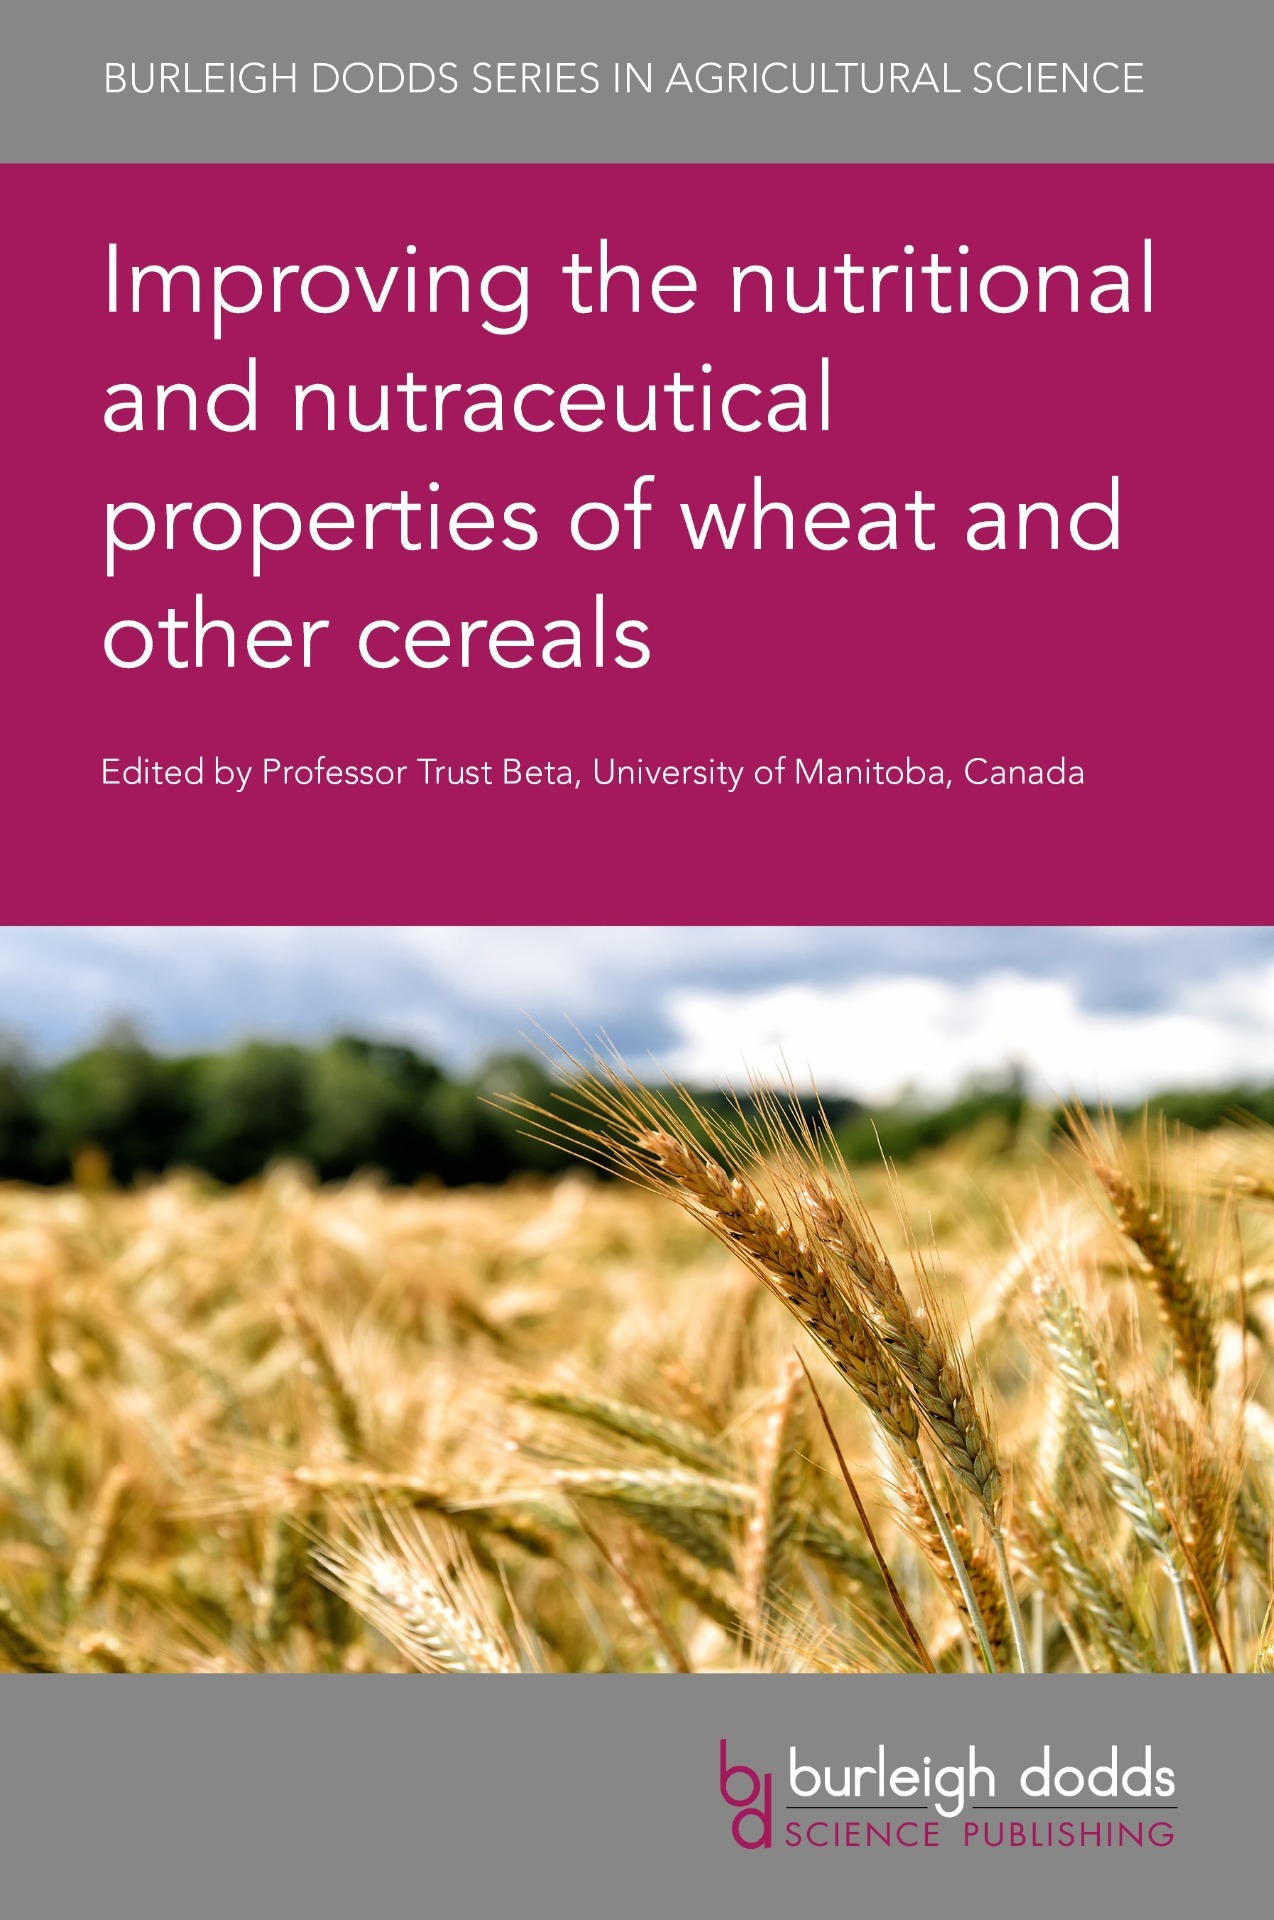 Improving the nutritional and nutraceutical properties of wheat and other cereals